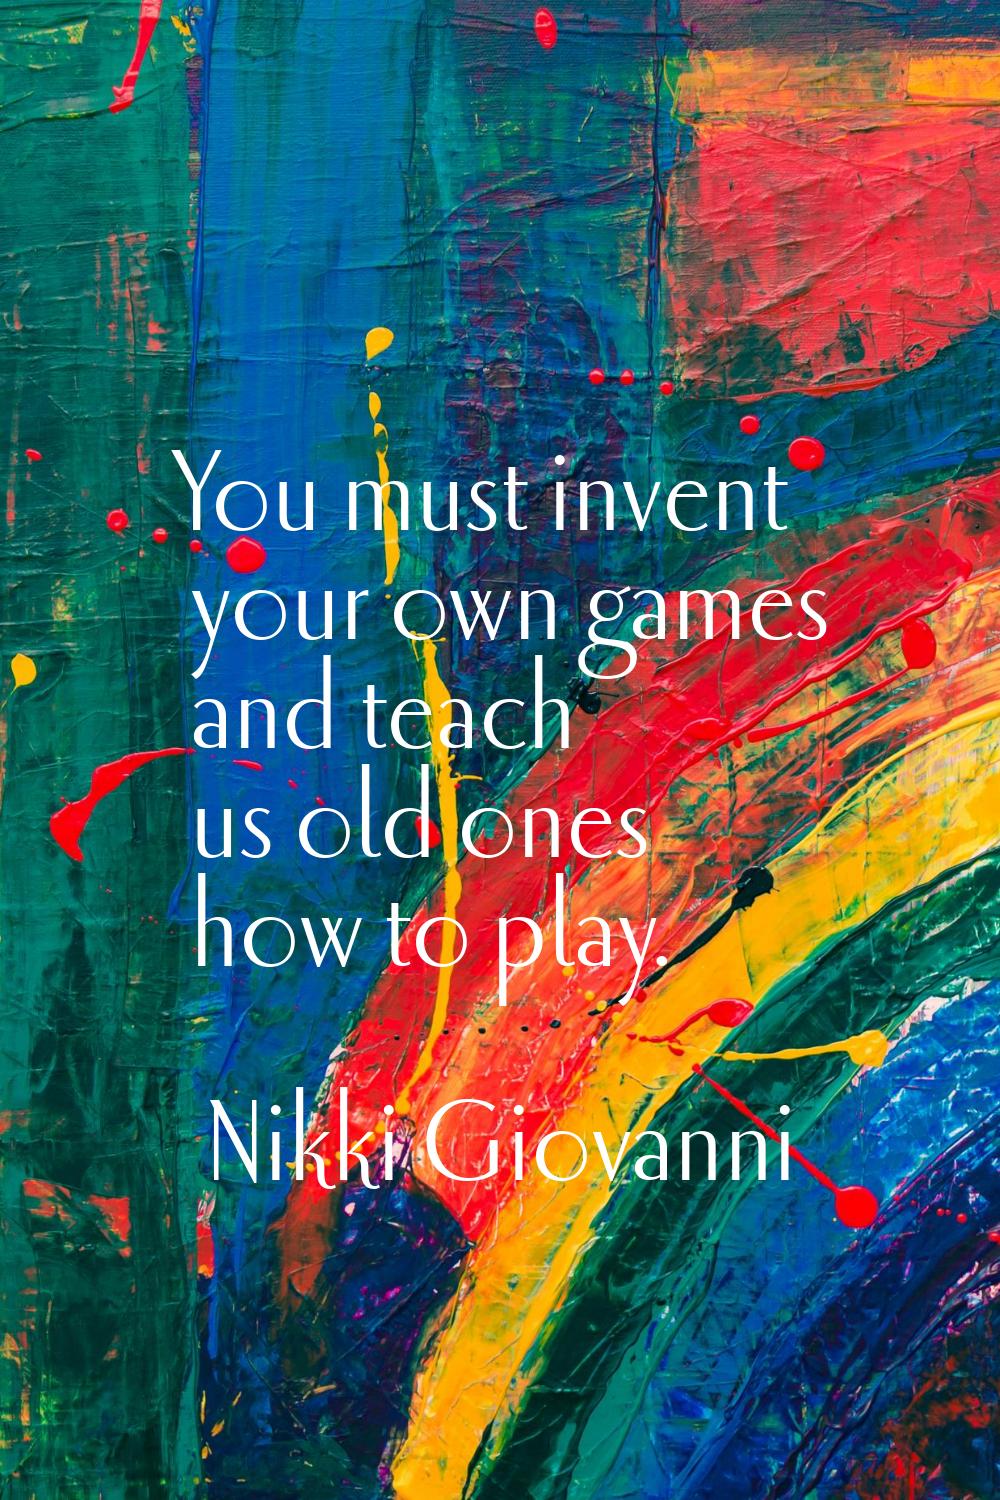 You must invent your own games and teach us old ones how to play.